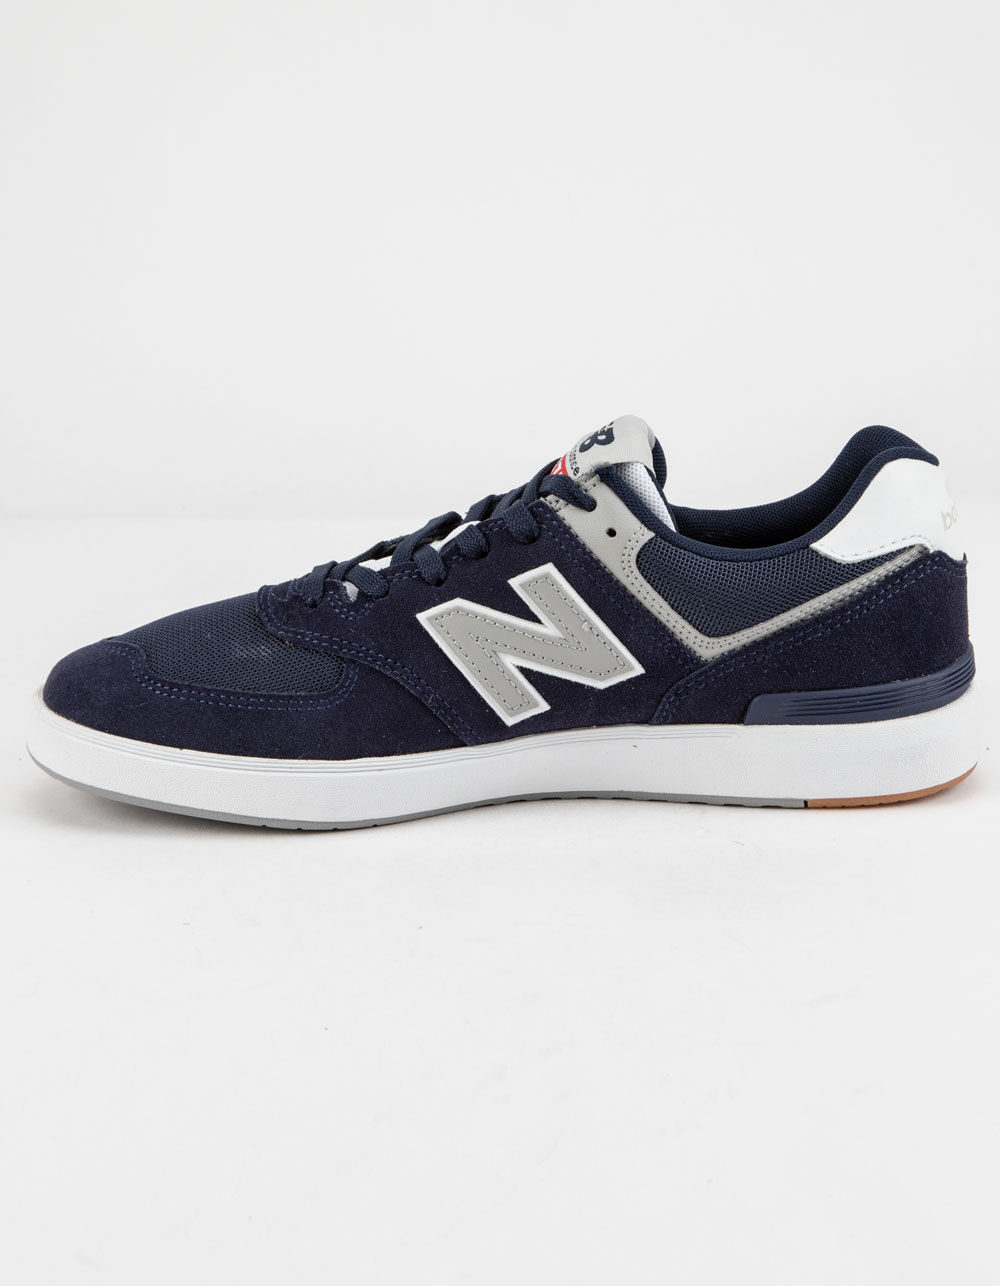 NEW BALANCE AM574 Navy With White Mens Shoes - NAVY/WHITE | Tillys